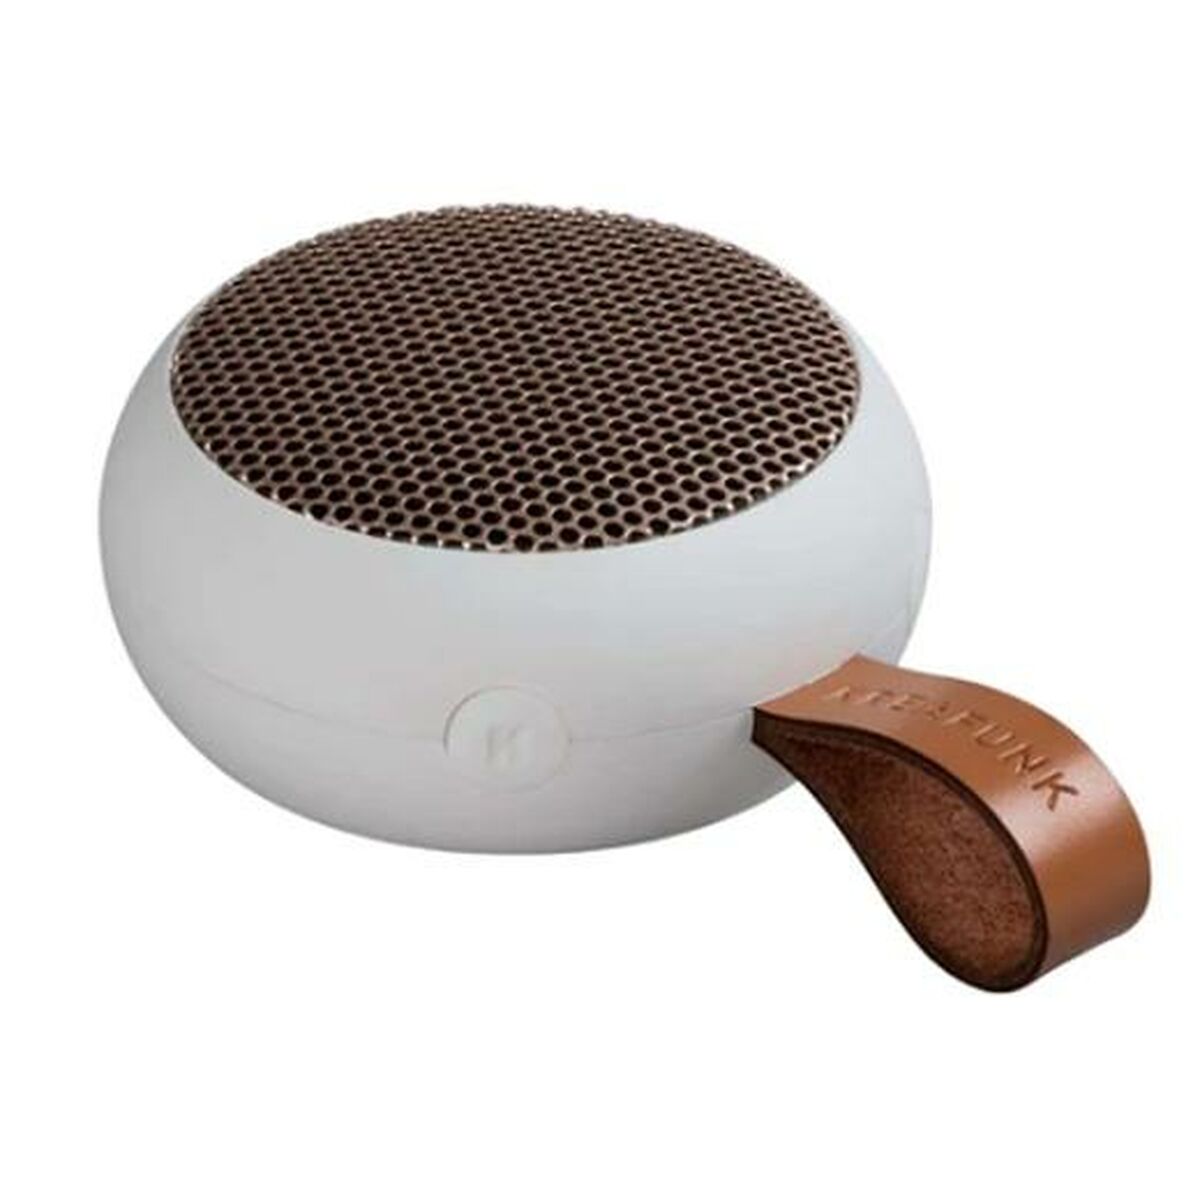 Portable Bluetooth Speakers Kreafunk White 6 W, Kreafunk, Electronics, Mobile communication and accessories, portable-bluetooth-speakers-kreafunk-white-6-w, Brand_Kreafunk, category-reference-2609, category-reference-2882, category-reference-2923, category-reference-t-19653, category-reference-t-21311, category-reference-t-4036, category-reference-t-4037, Condition_NEW, entertainment, music, office, Price_50 - 100, telephones & tablets, wifi y bluetooth, RiotNook